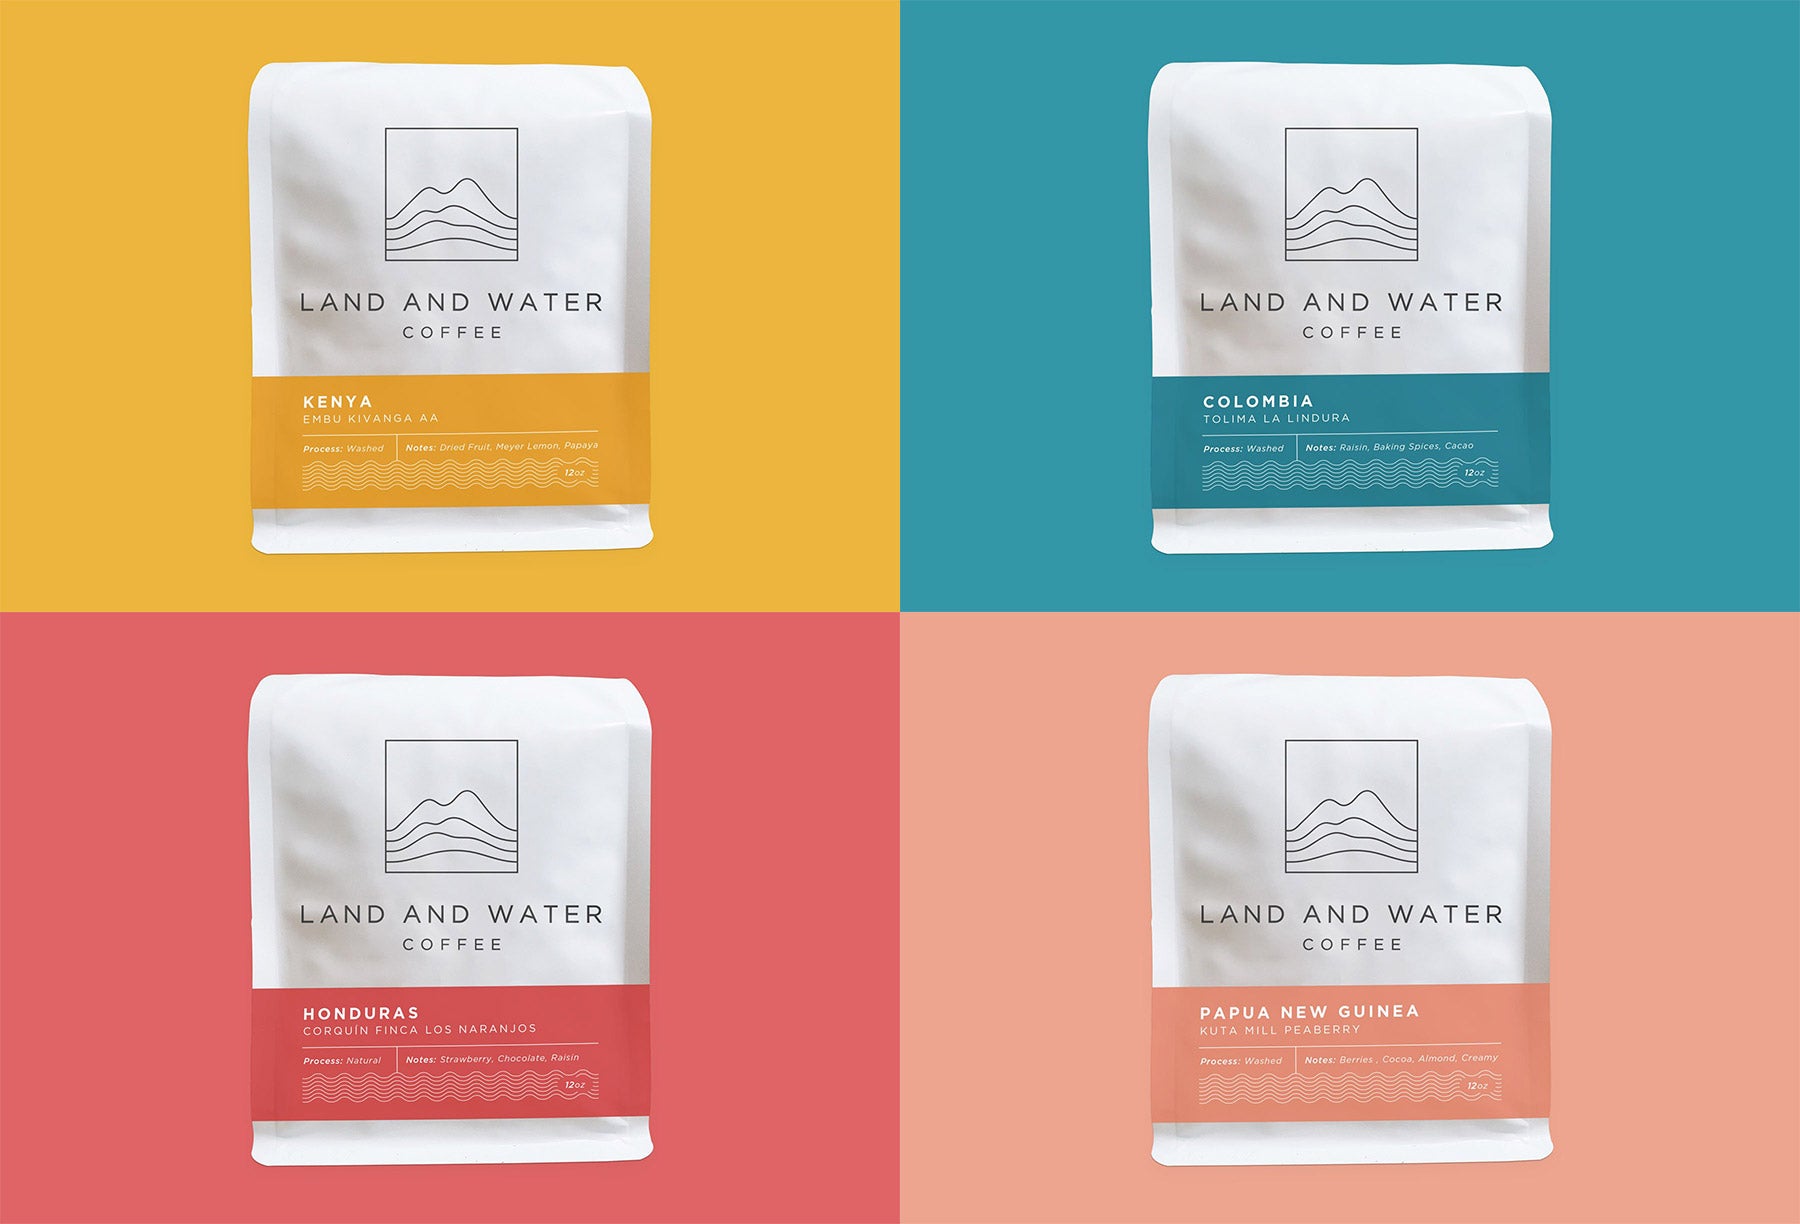 4 Land and Water Coffee bags representing coffee from each origin